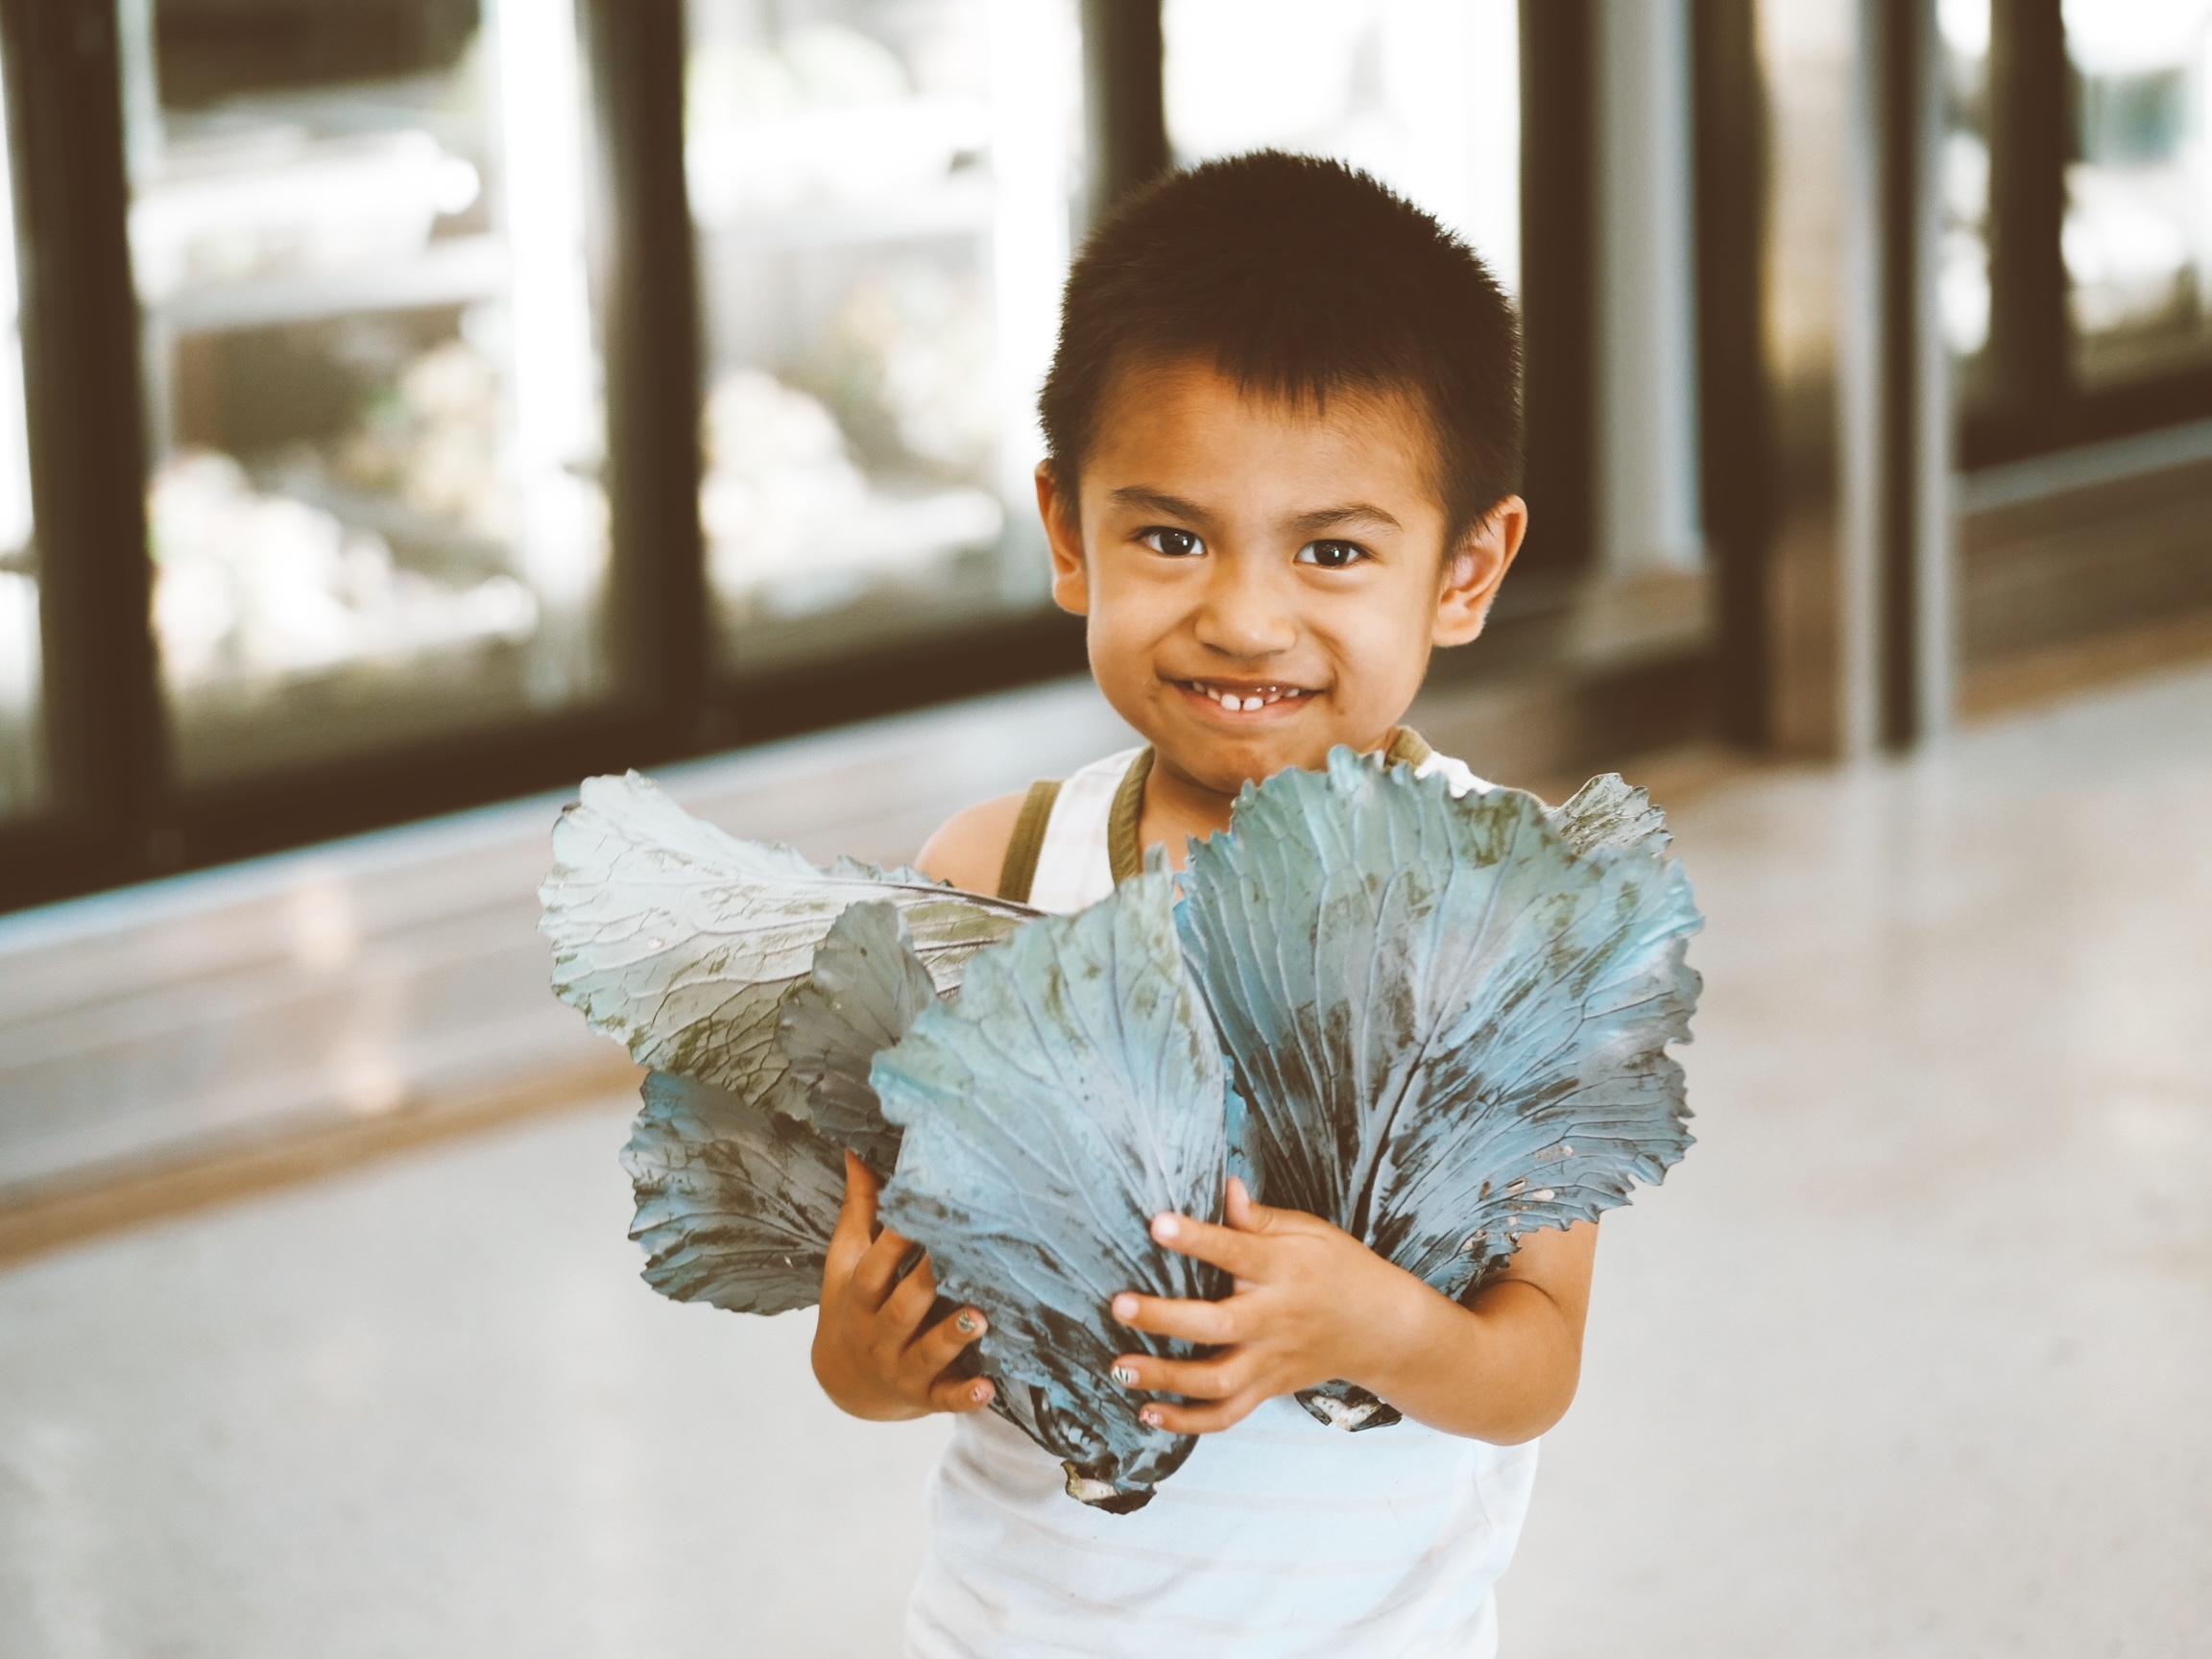 Smiling boy holds armfuls of cabbage.